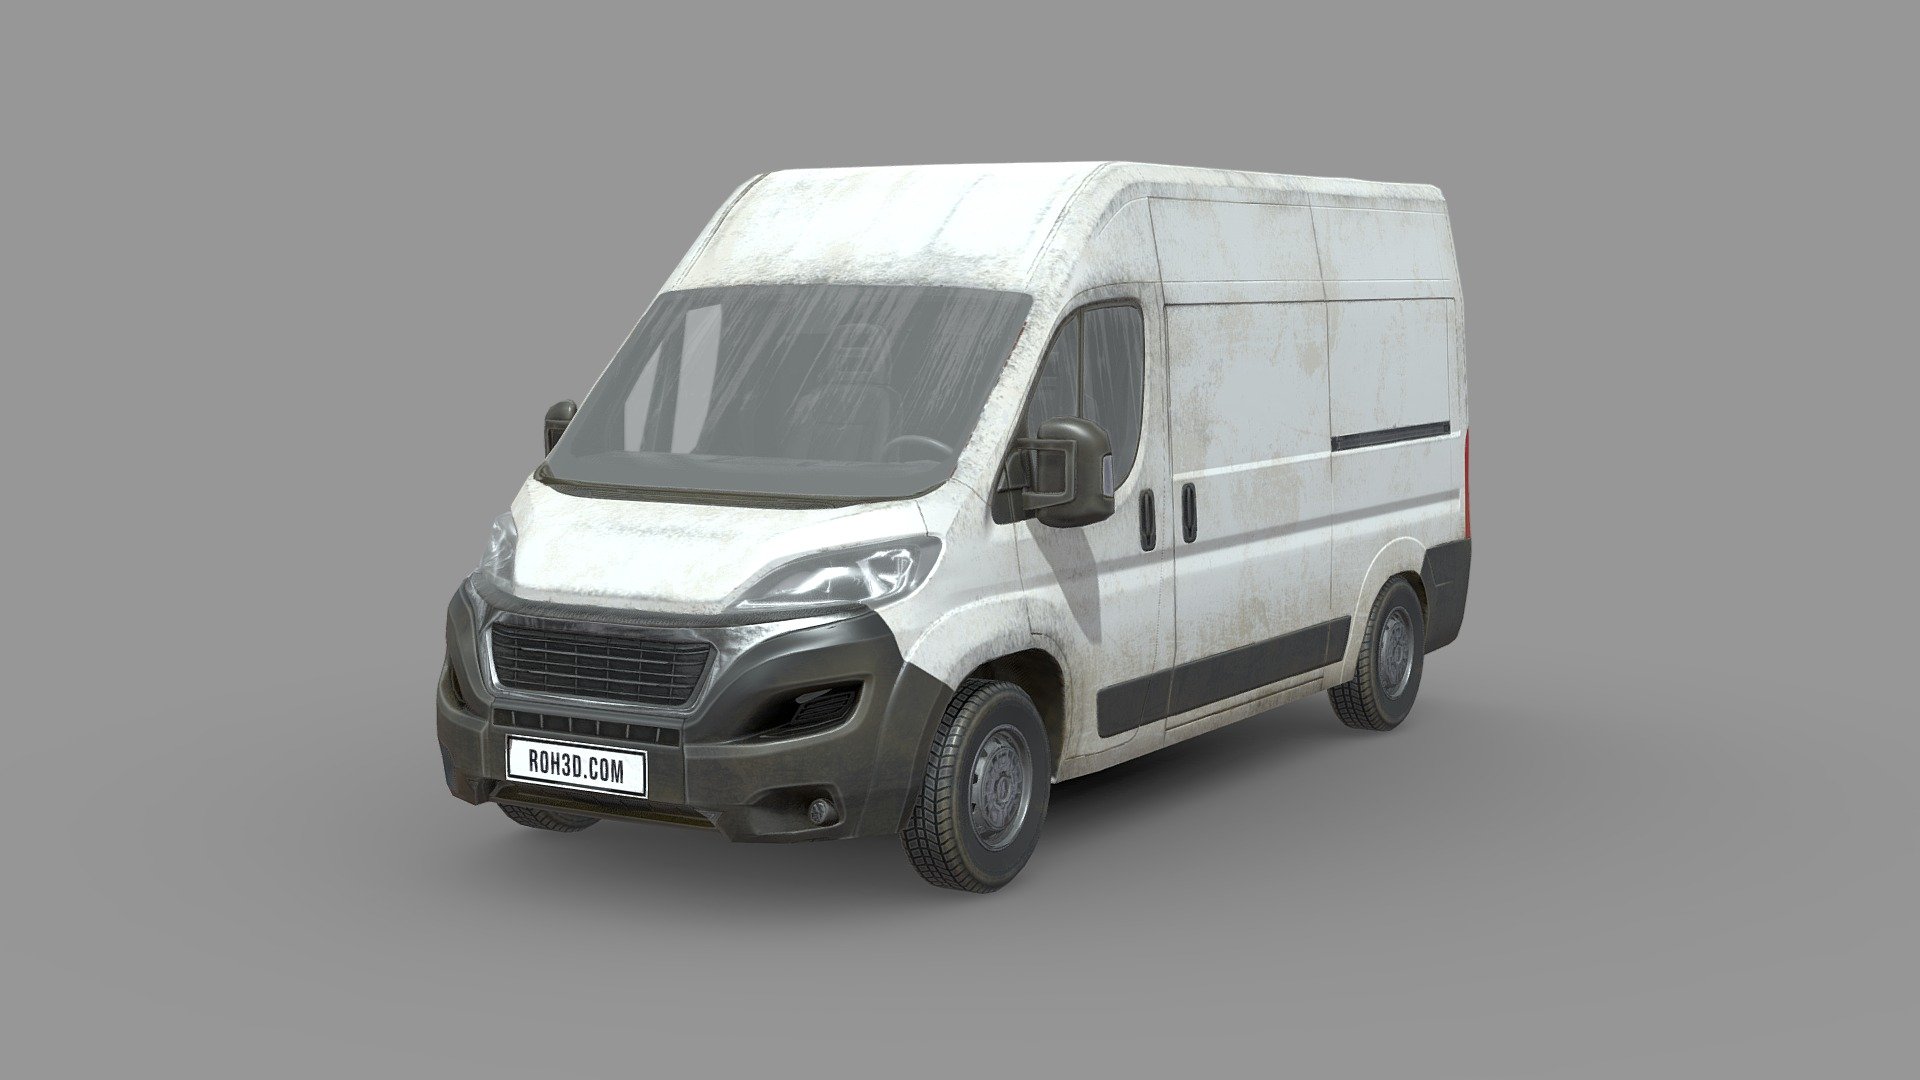 The Fiat Ducato is a light commercial vehicle jointly developed by Fiat Group and PSA Group (currently Stellantis), and mainly manufactured by Sevel, a joint venture between the two companies since 1981. It has also been sold as the Citroën C25, Peugeot J5, Alfa Romeo AR6 and Talbot Express and later as the Fiat Ducato, Citroën Jumper, and Peugeot Boxer, from 1994 onwards. It entered the North American market as the Ram ProMaster in May 2014 for the 2015 model year.

In Europe, it is produced at the Sevel Sud factory, in Atessa, Italy. It has also been produced at the Iveco factory in Sete Lagoas, Brazil, at the Karsan factory in Akçalar, Turkey, at the Fiat Chrysler Automobiles Saltillo Truck Assembly Plant in Saltillo, Mexico, and at the Fiat-Sollers factory in Elabuga, Russia. Since 1981, more than 2.6 million Fiat Ducatos have been produced 3d model